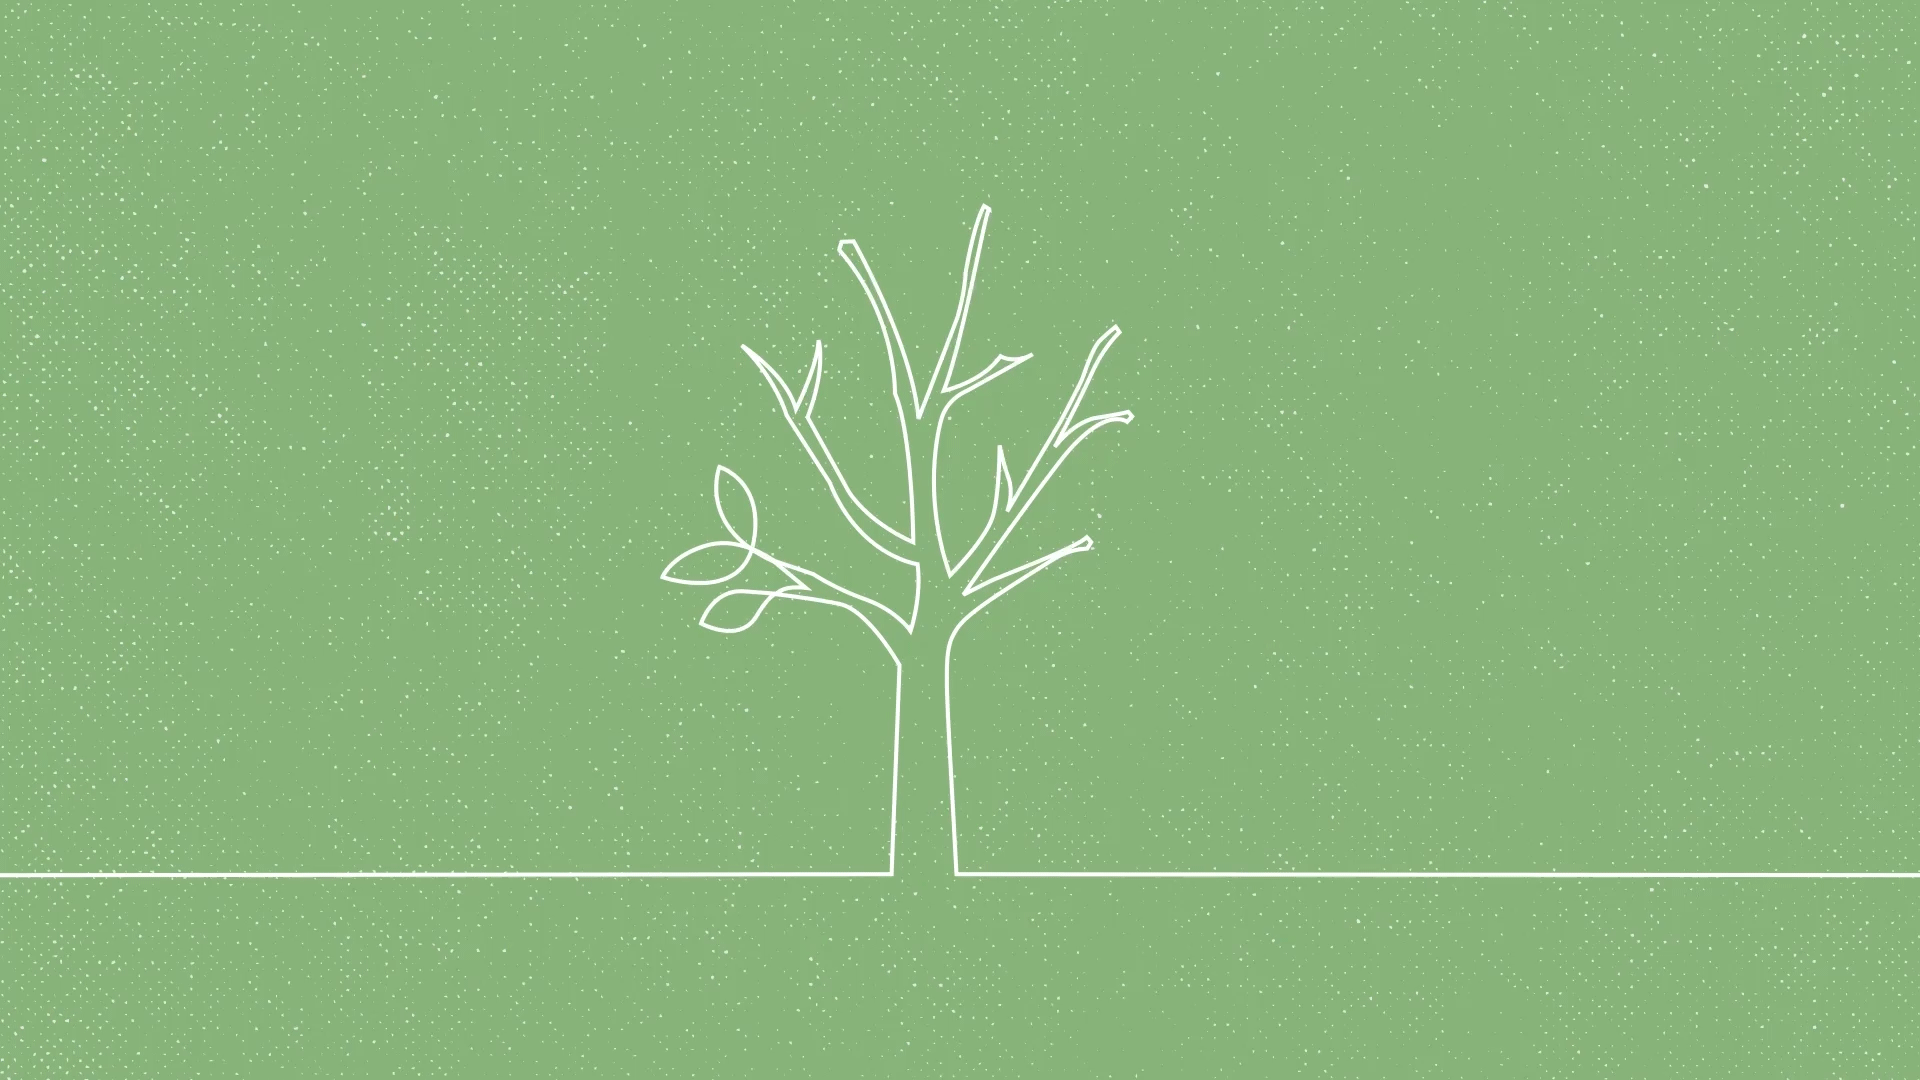 A GIF depicting a tree gradually adding its leaves